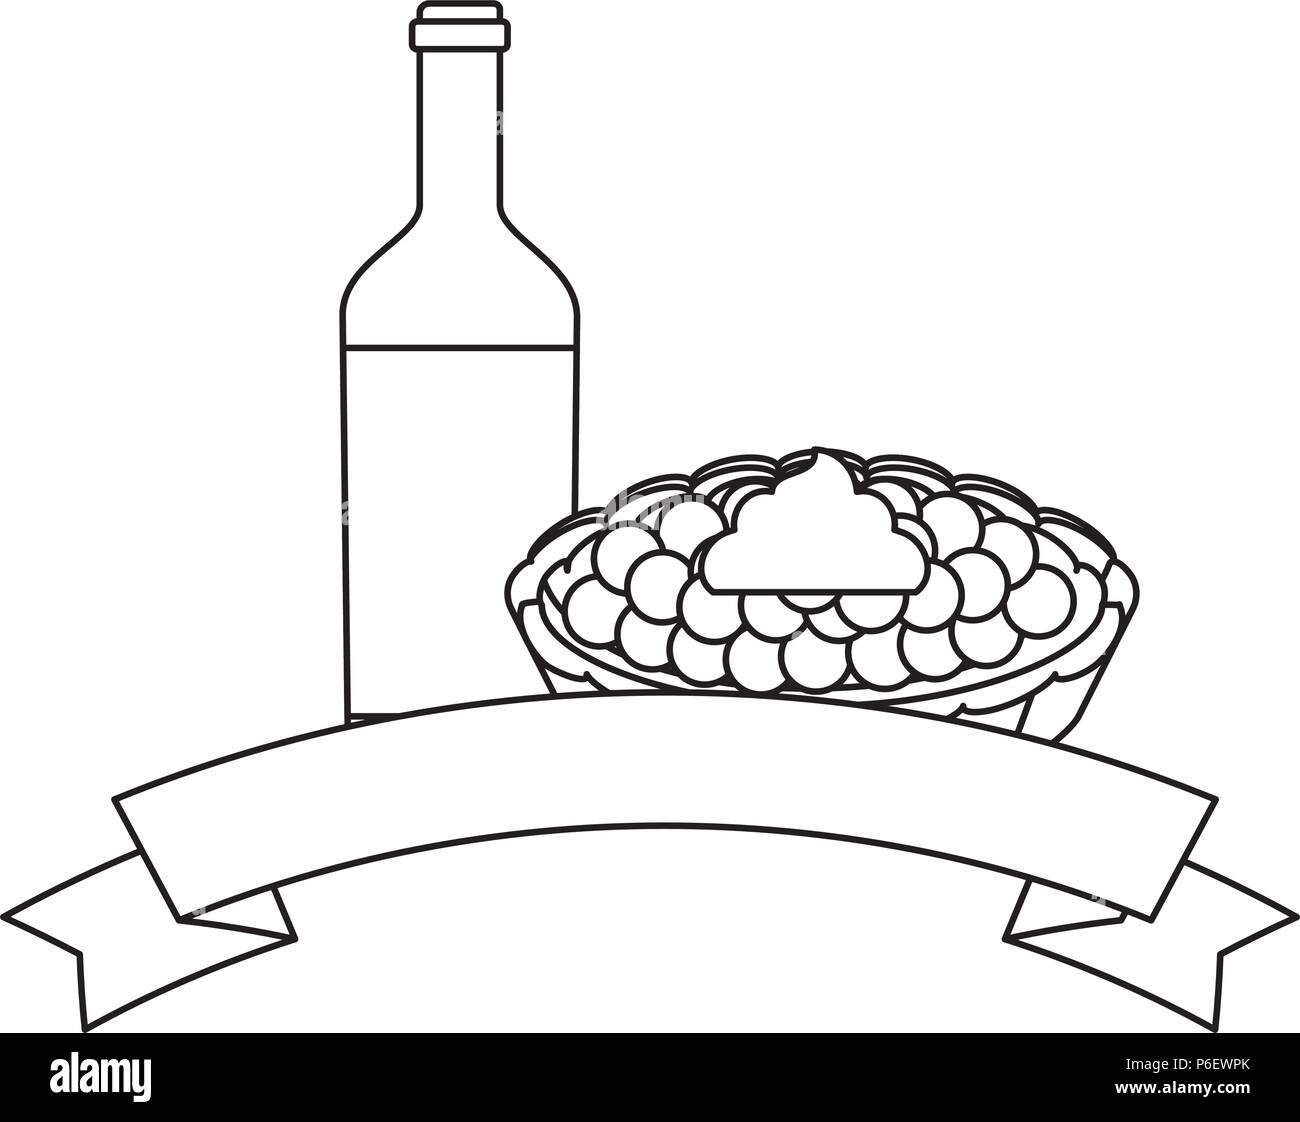 emblem with wine bottle and sweet pie icon over white background, vector illustration Stock Vector